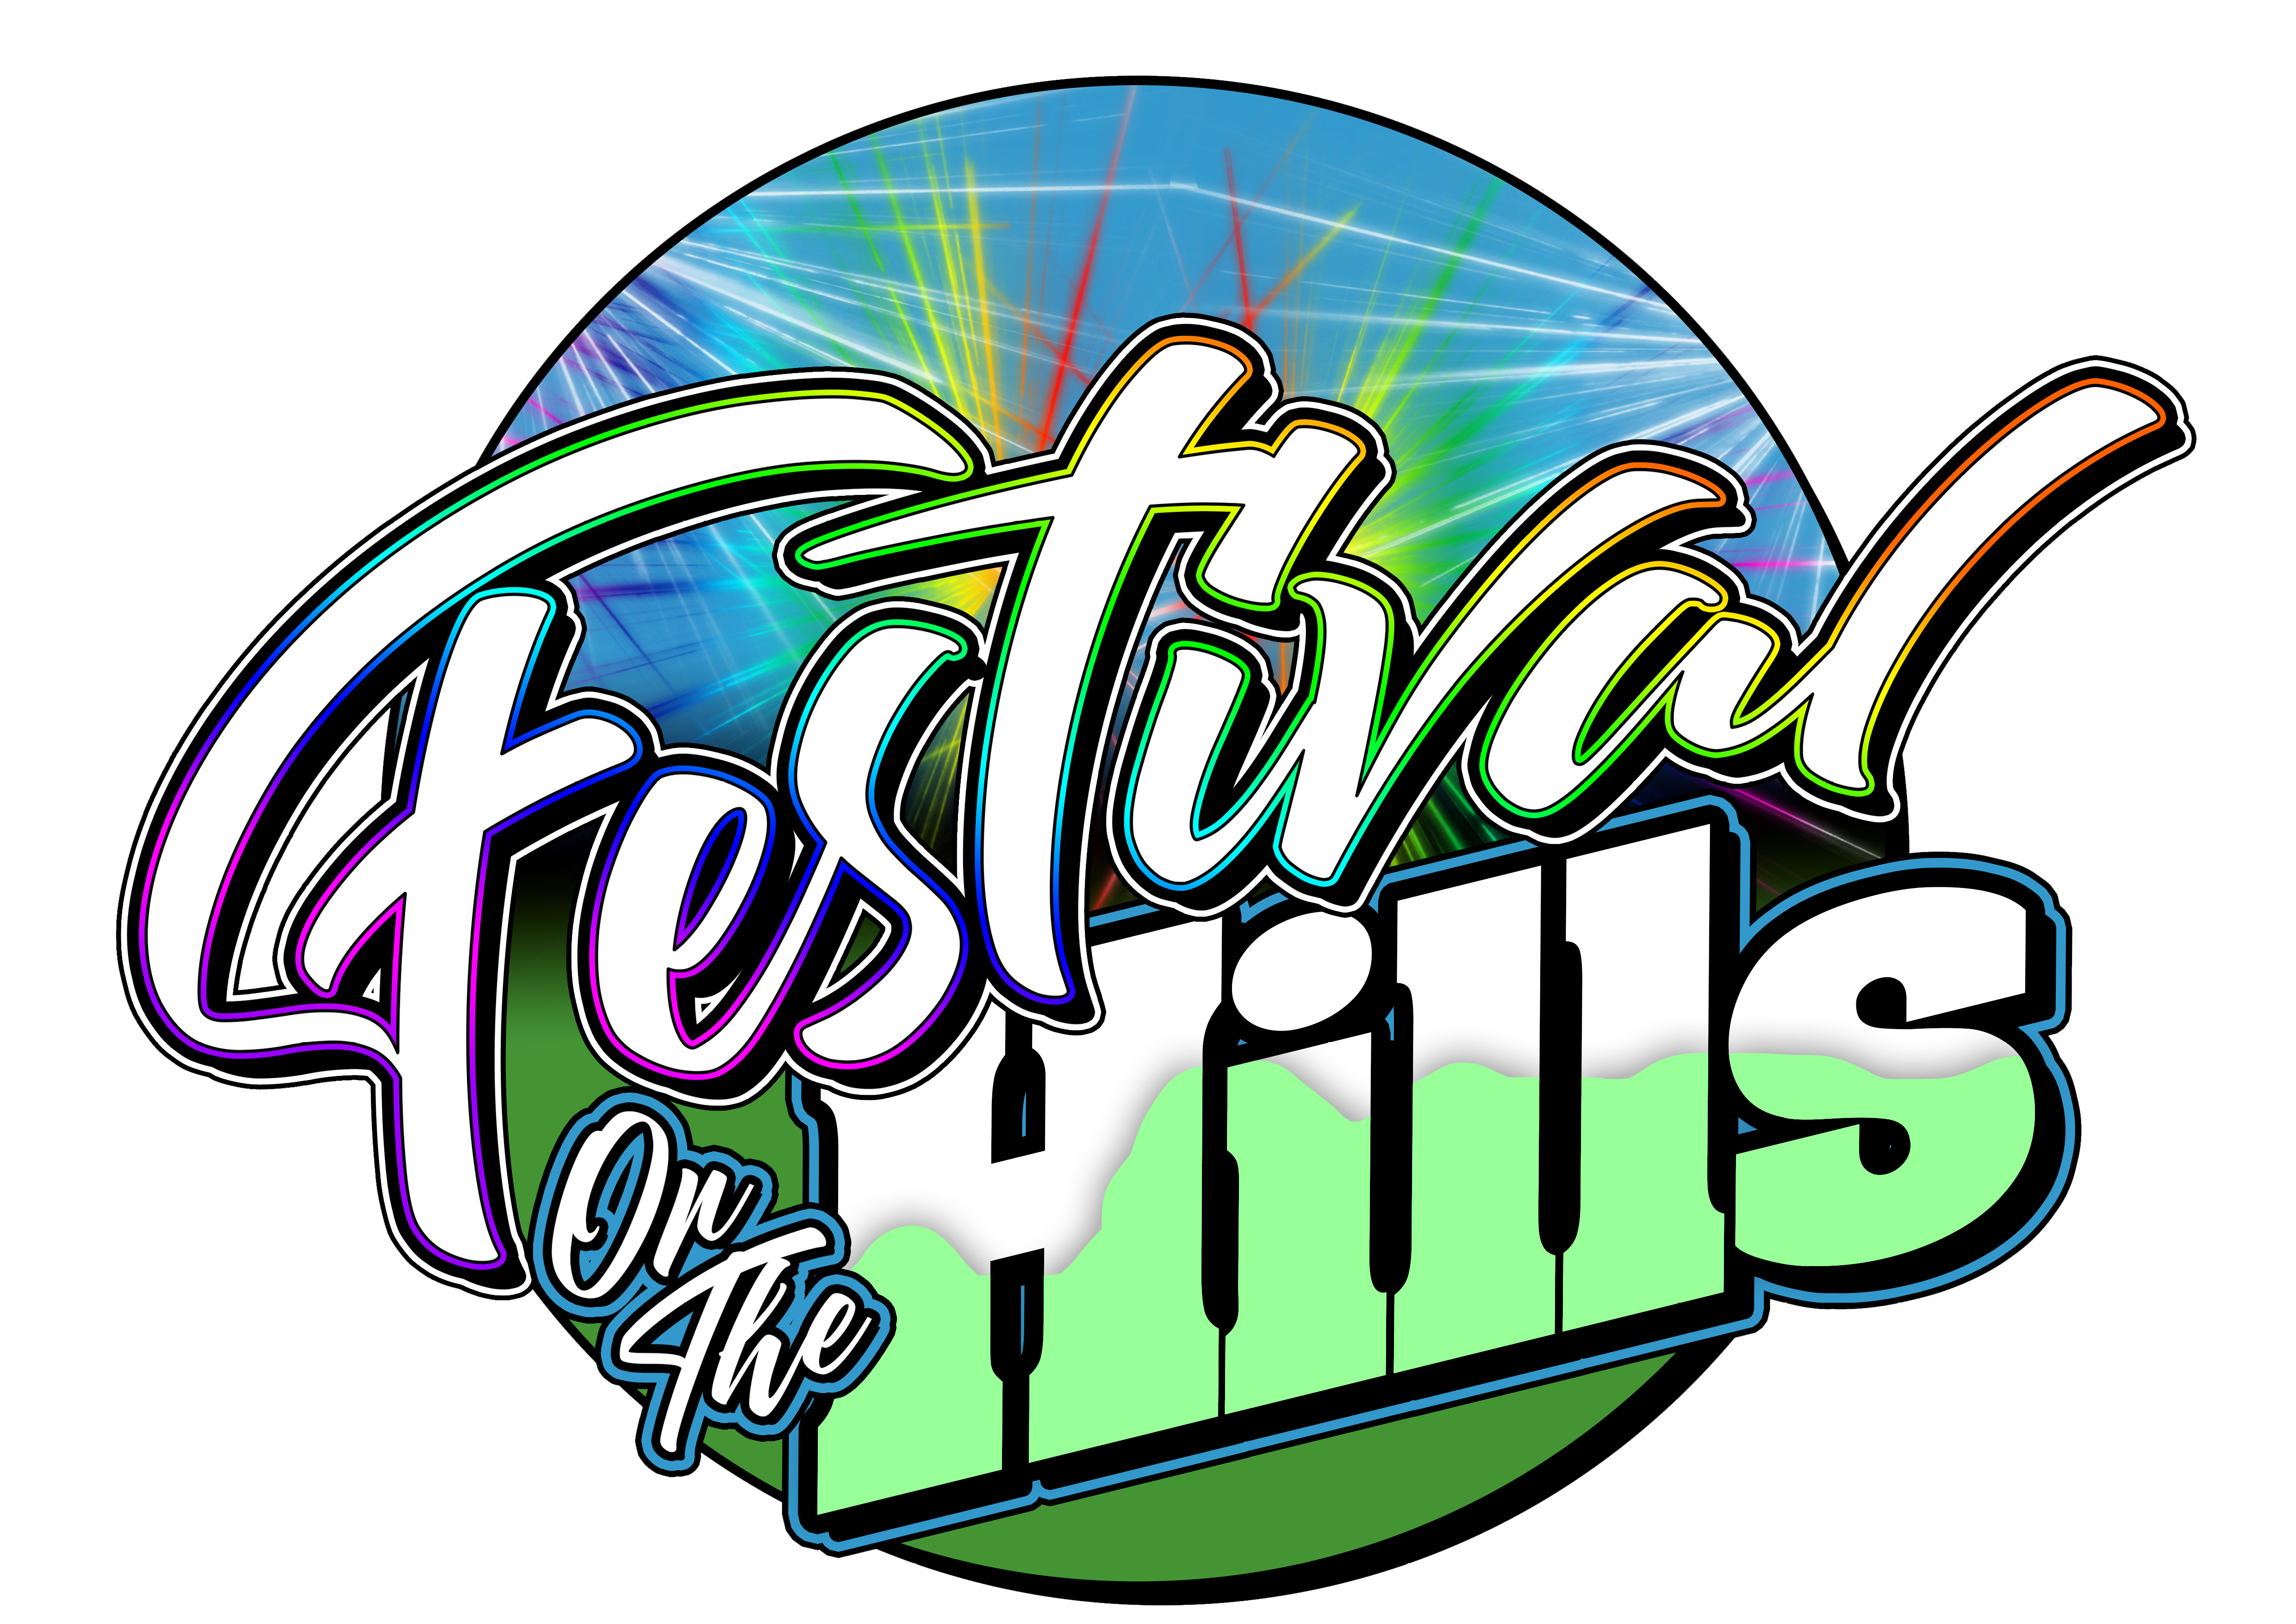 FESTIVAL ON THE HILLS